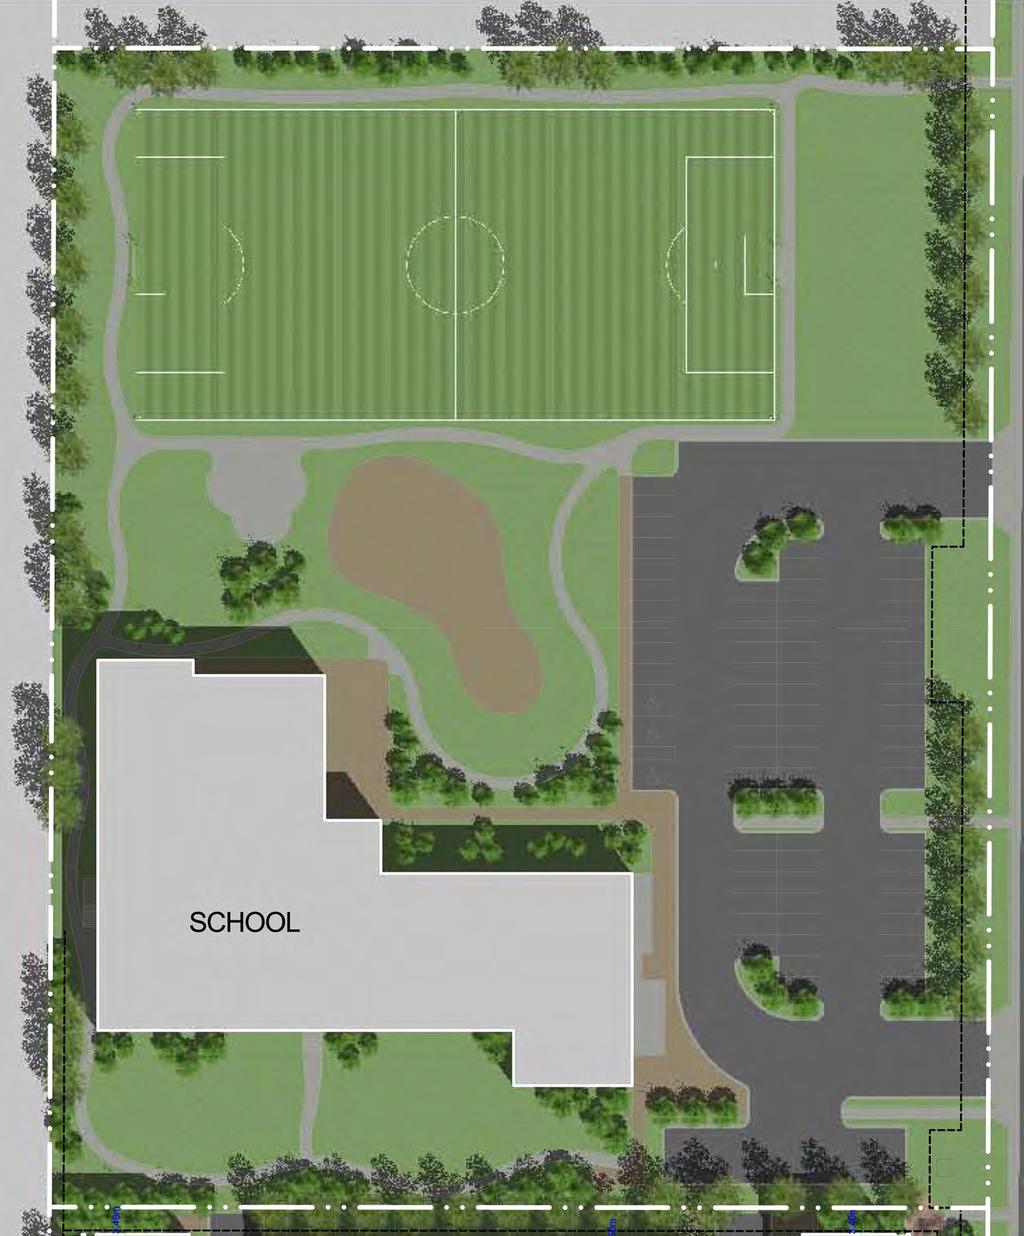 2 - STOREY PRIVATE SCHOOL COMPONENT KEY MAP SITE PLAN The 2-Storey